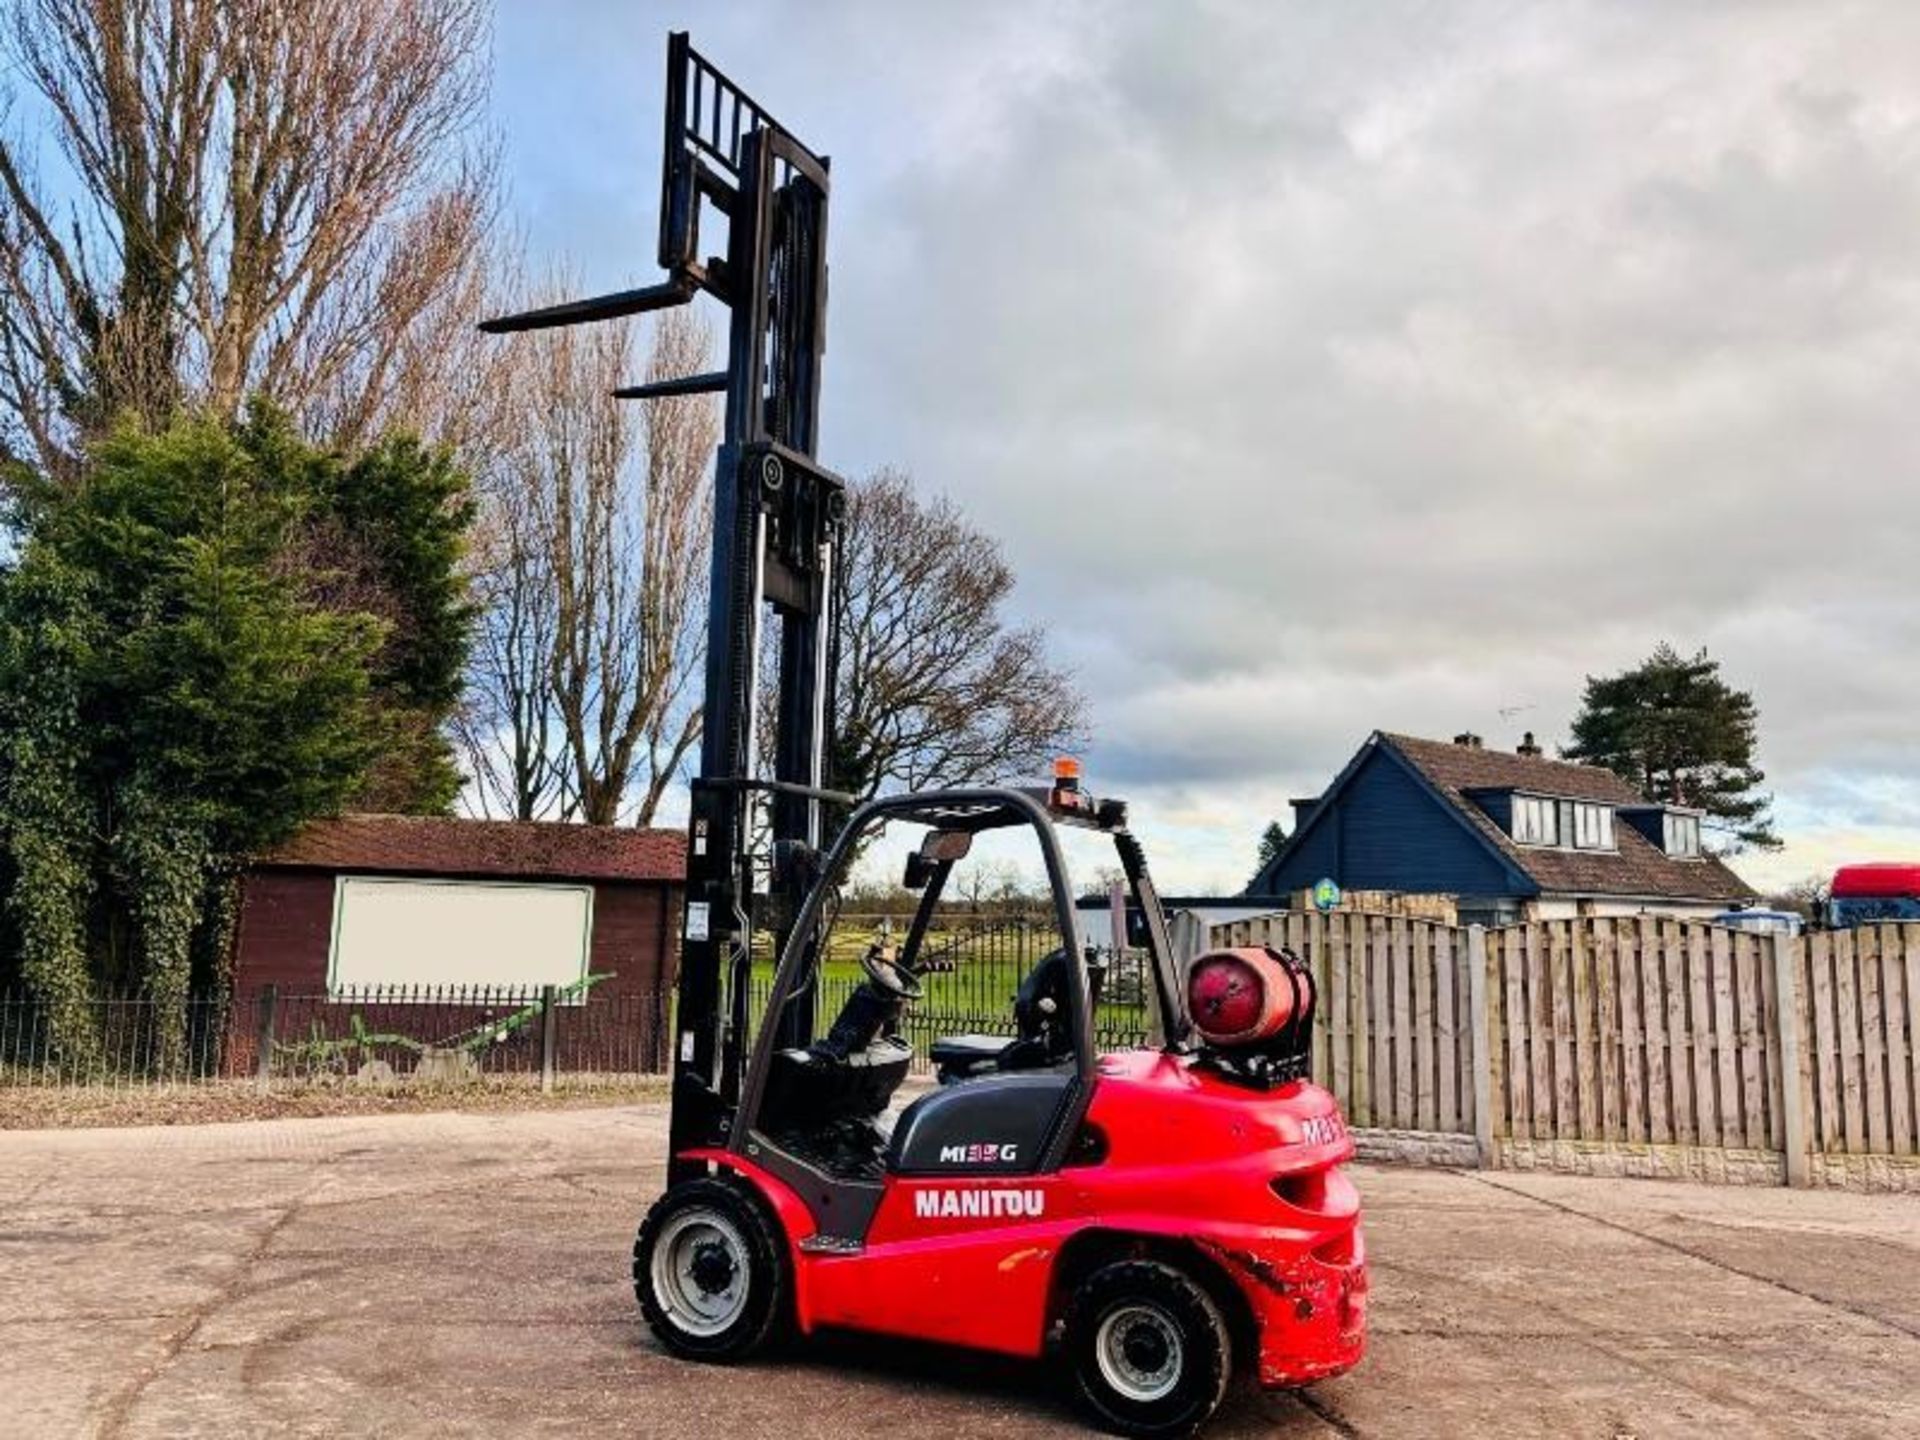 MANITOU MI35G CONTAINER SPEC FORKLIFT *YEAR 2016, 2070 HOURS* C/W SIDE SHIFT - Image 18 of 18